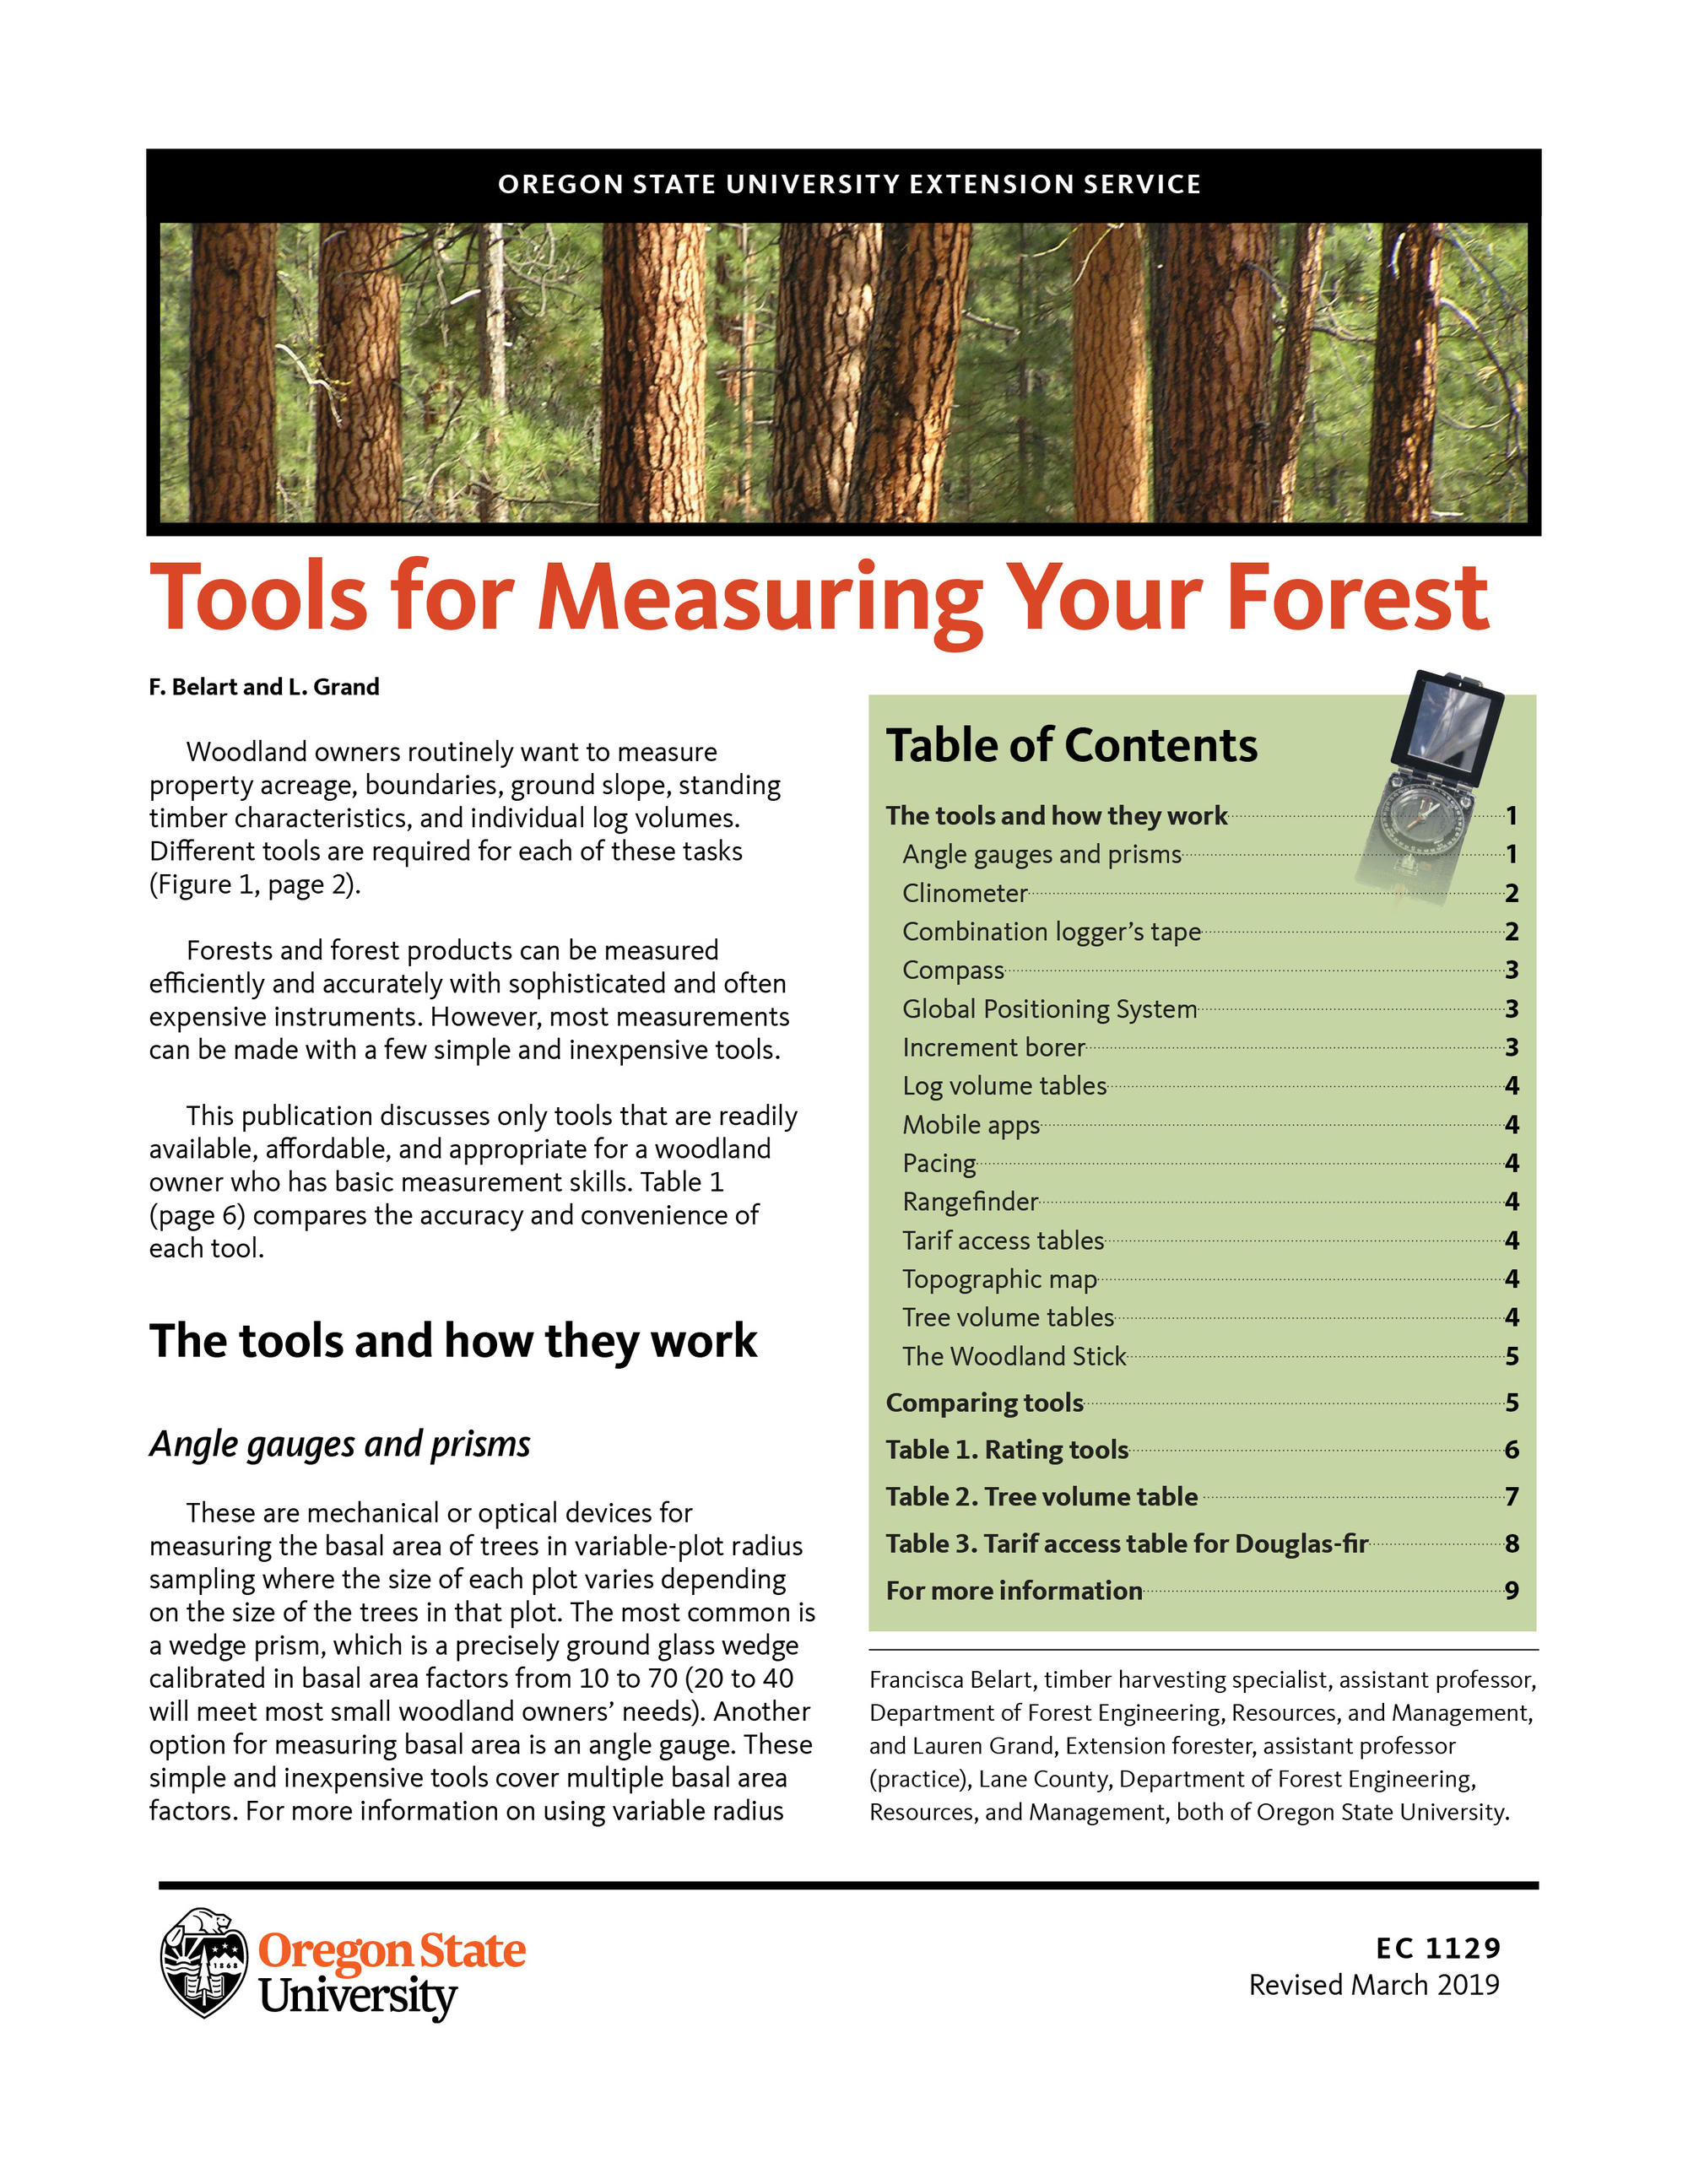 Tree Height Measurement, Forestry, Extension